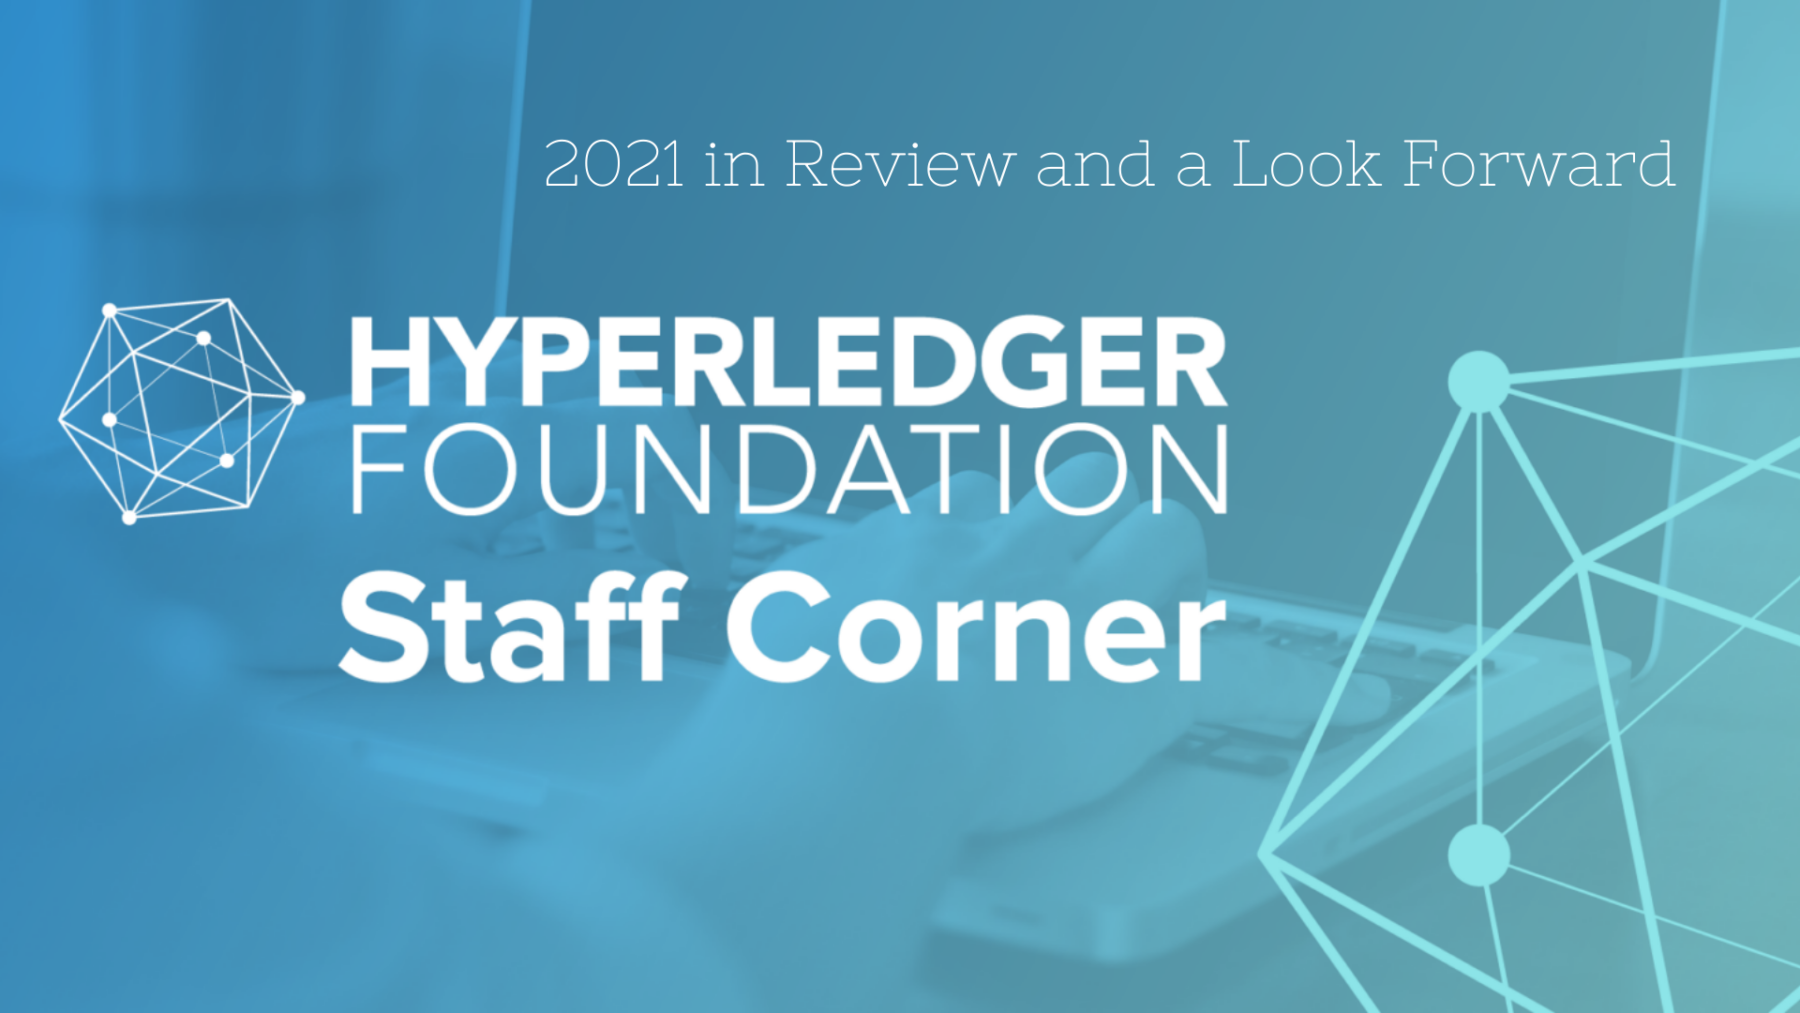 Staff Corner: 2021 in Review and a Look Forward